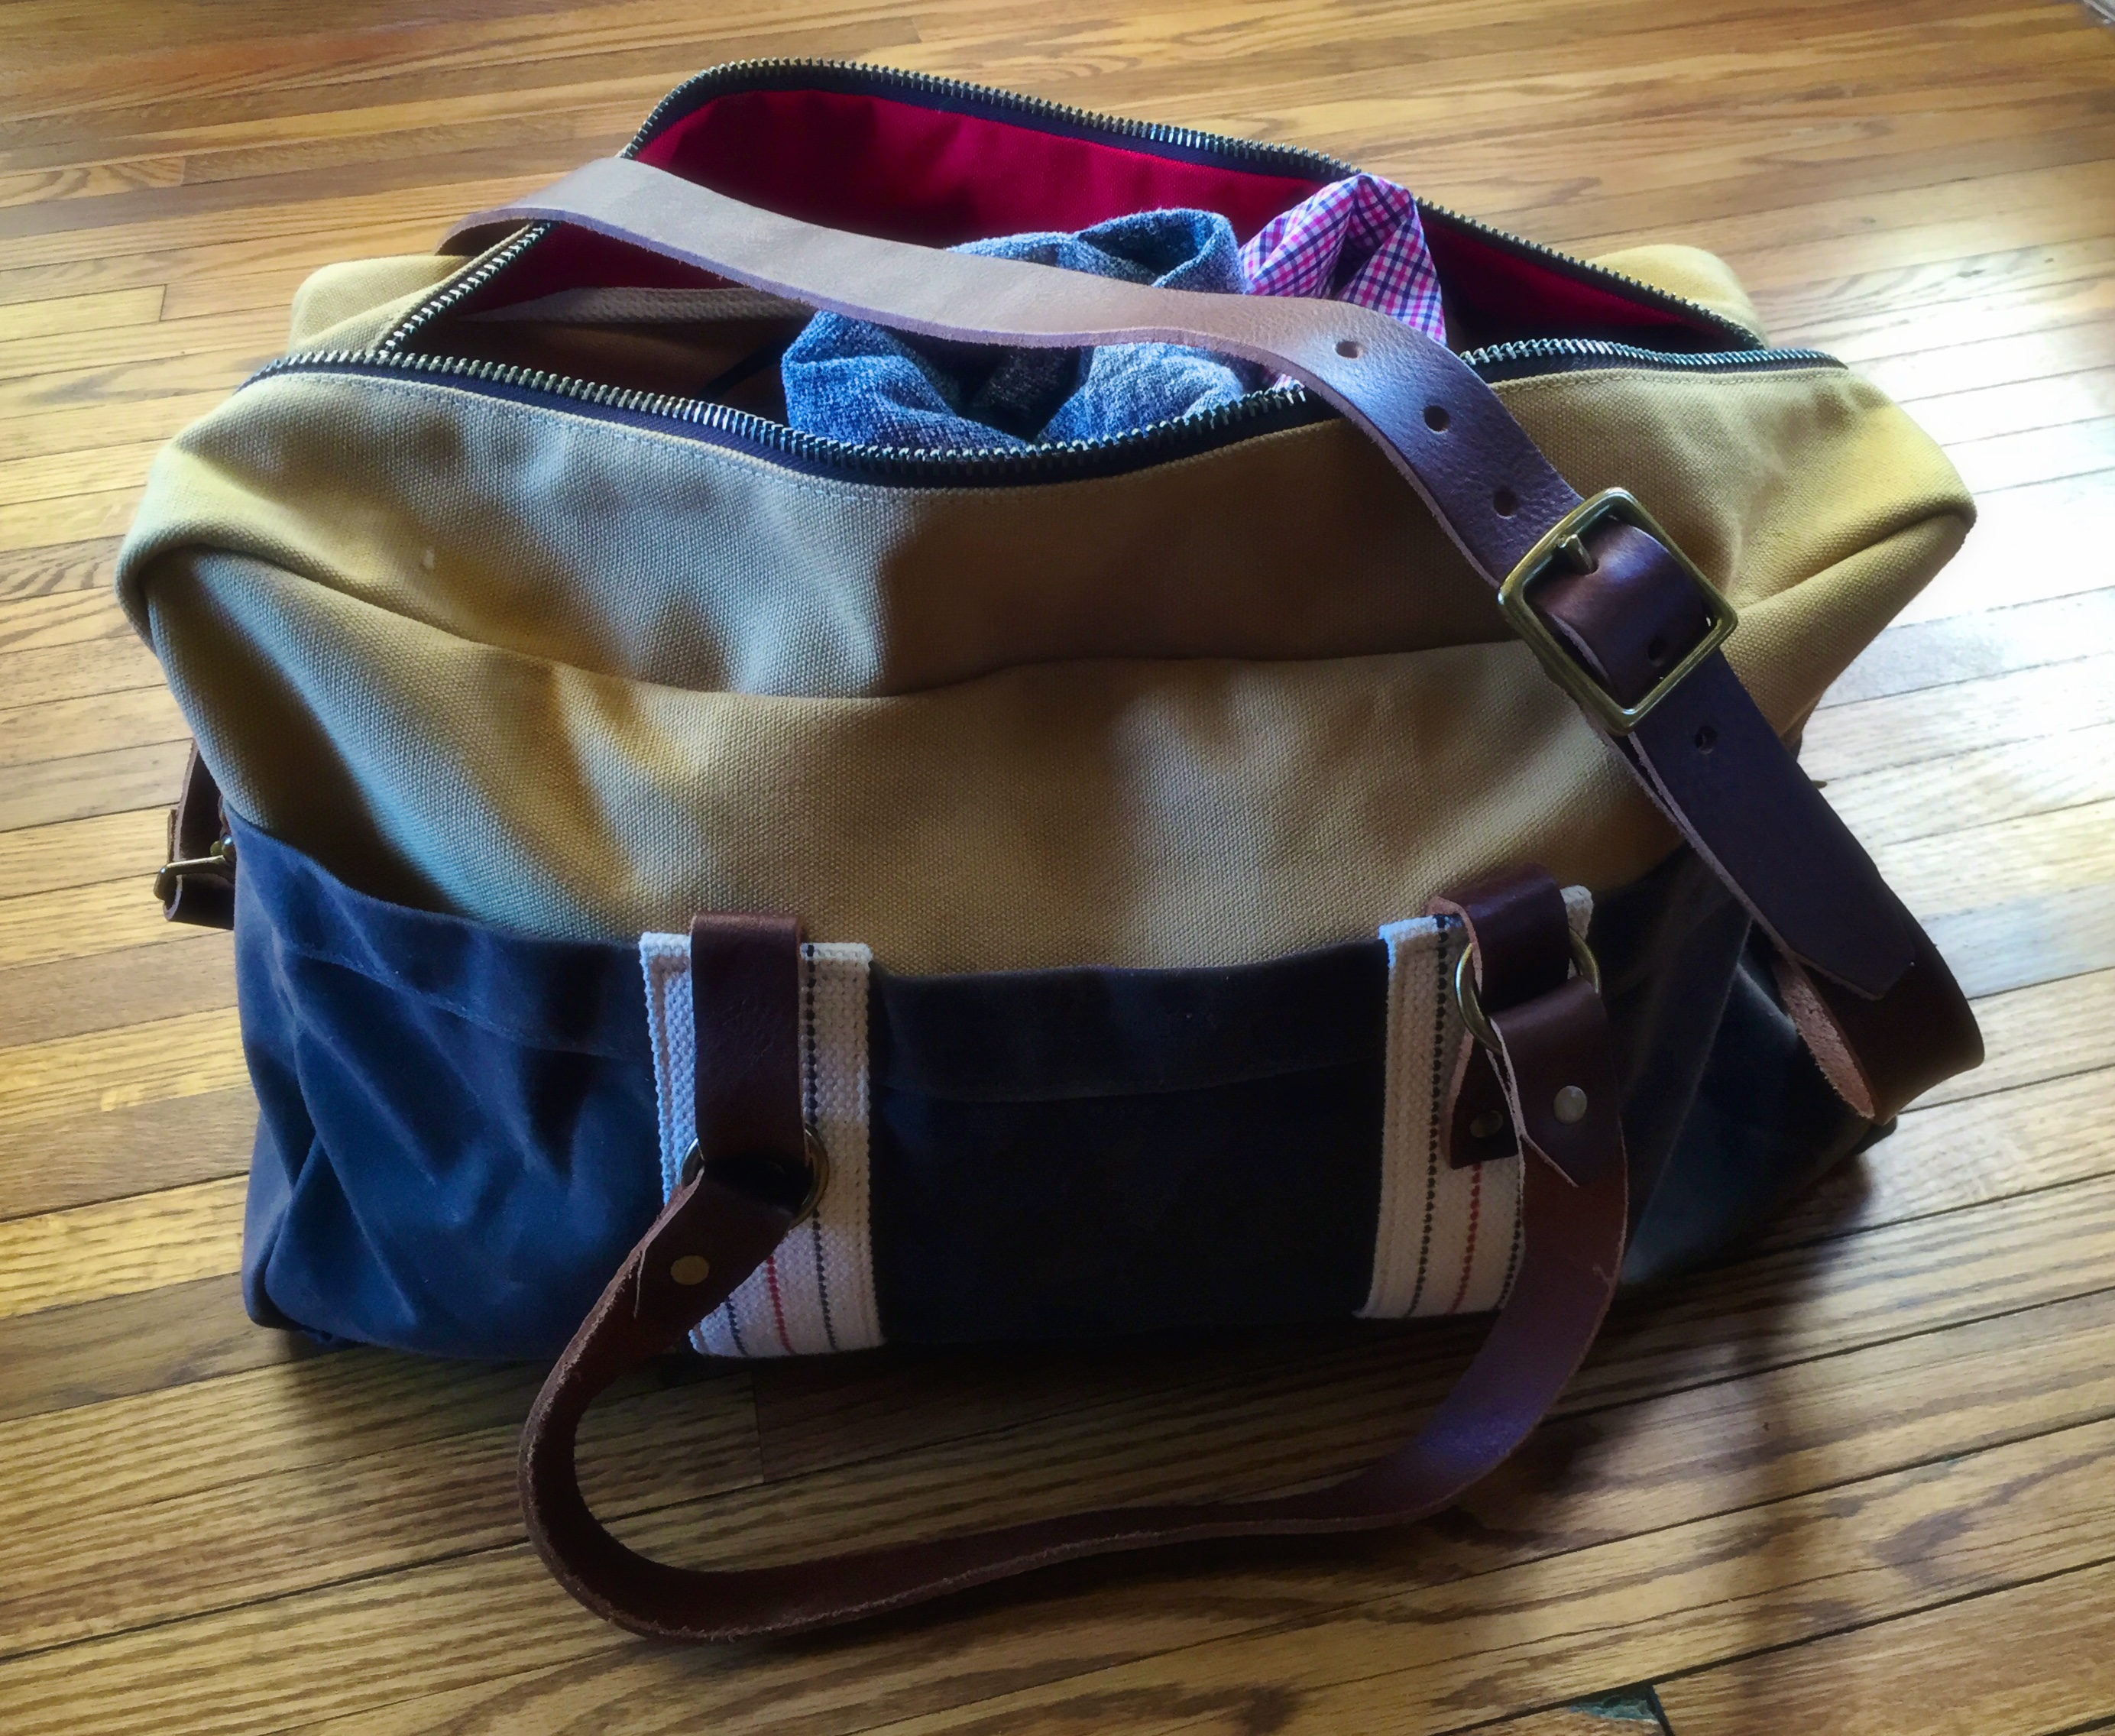 Small States Review: TM1985's Weekend Duffel is the perfect companion ...